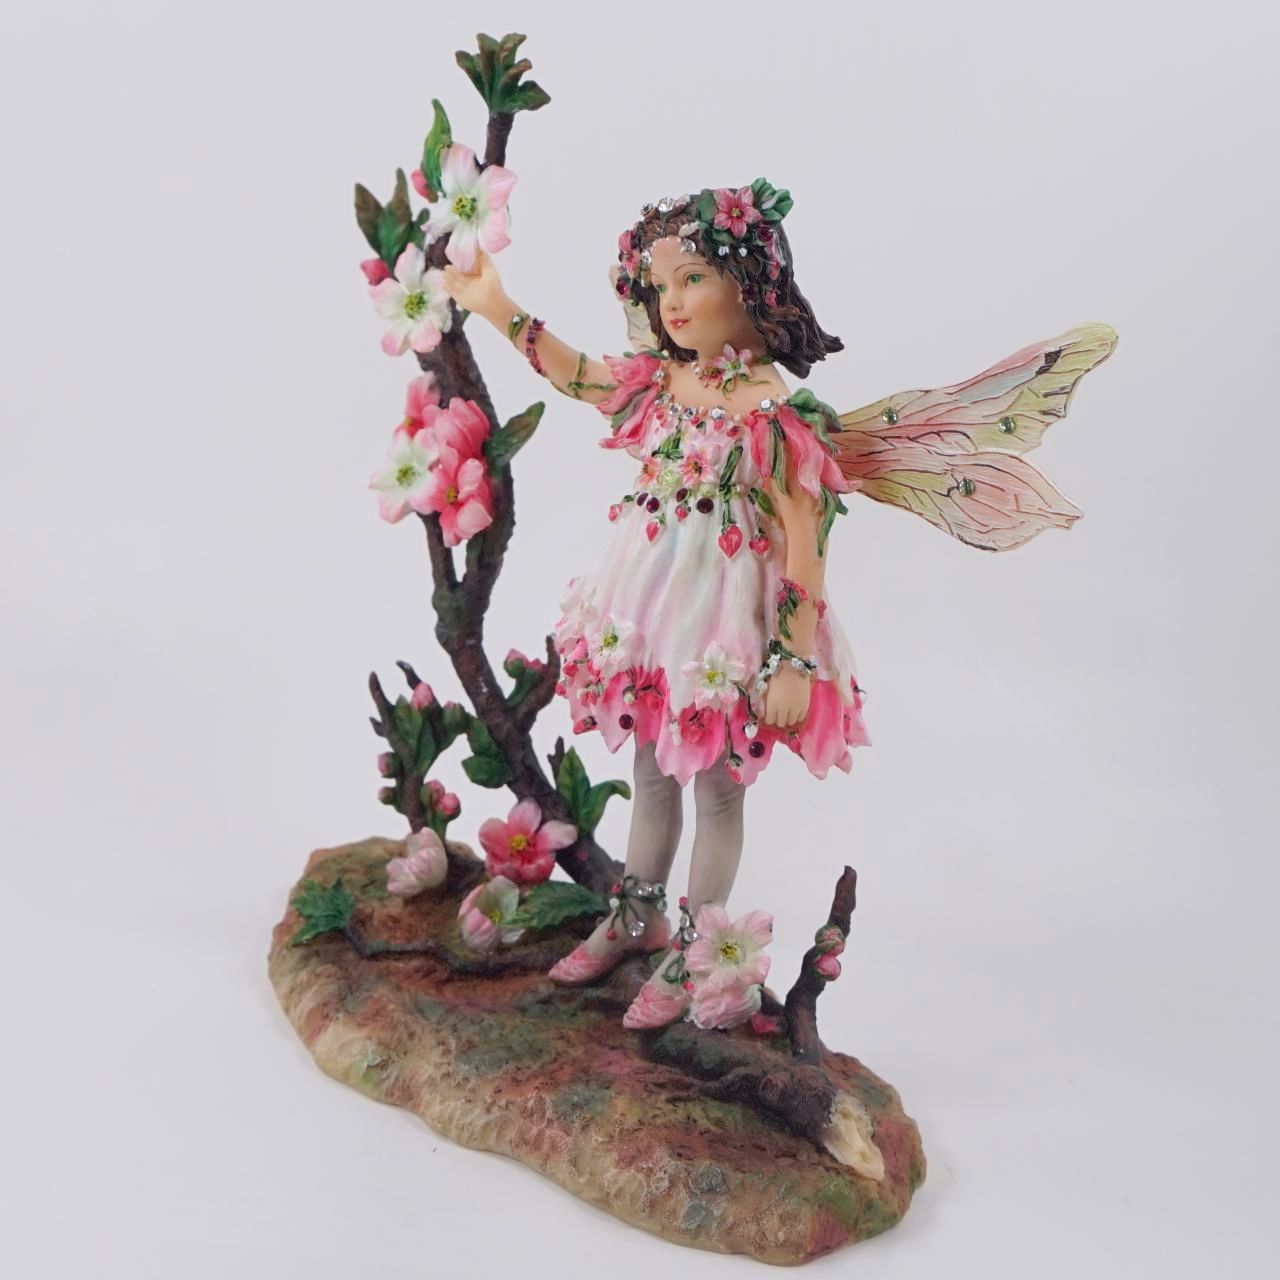 Crisalis Collection★ Cherry Blossom Faerie (1-629) Standard